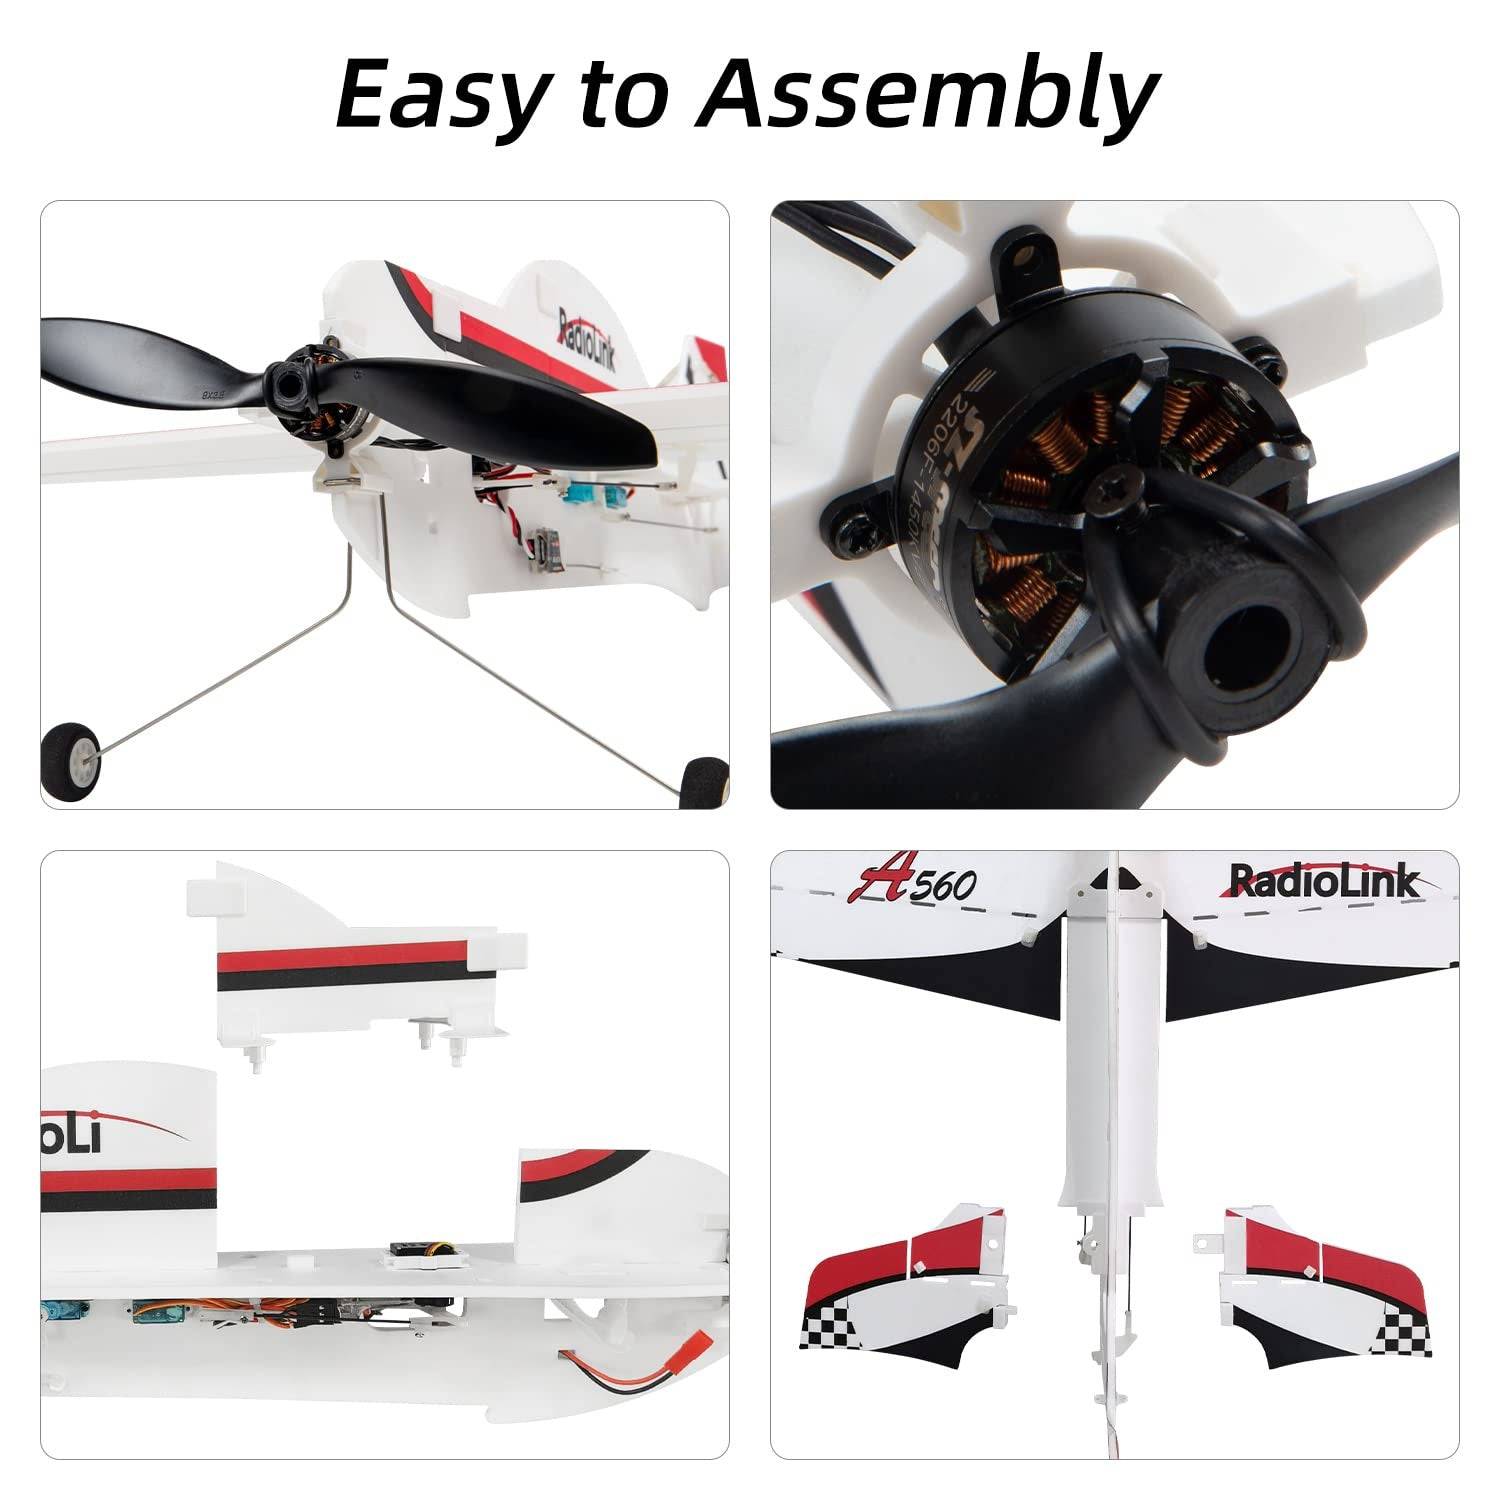 Radiolink A560 Plug & Play (PNP) RC Gyro Airplane with 6 Flight Modes (No Radio/Receiver/Charger) - REES52